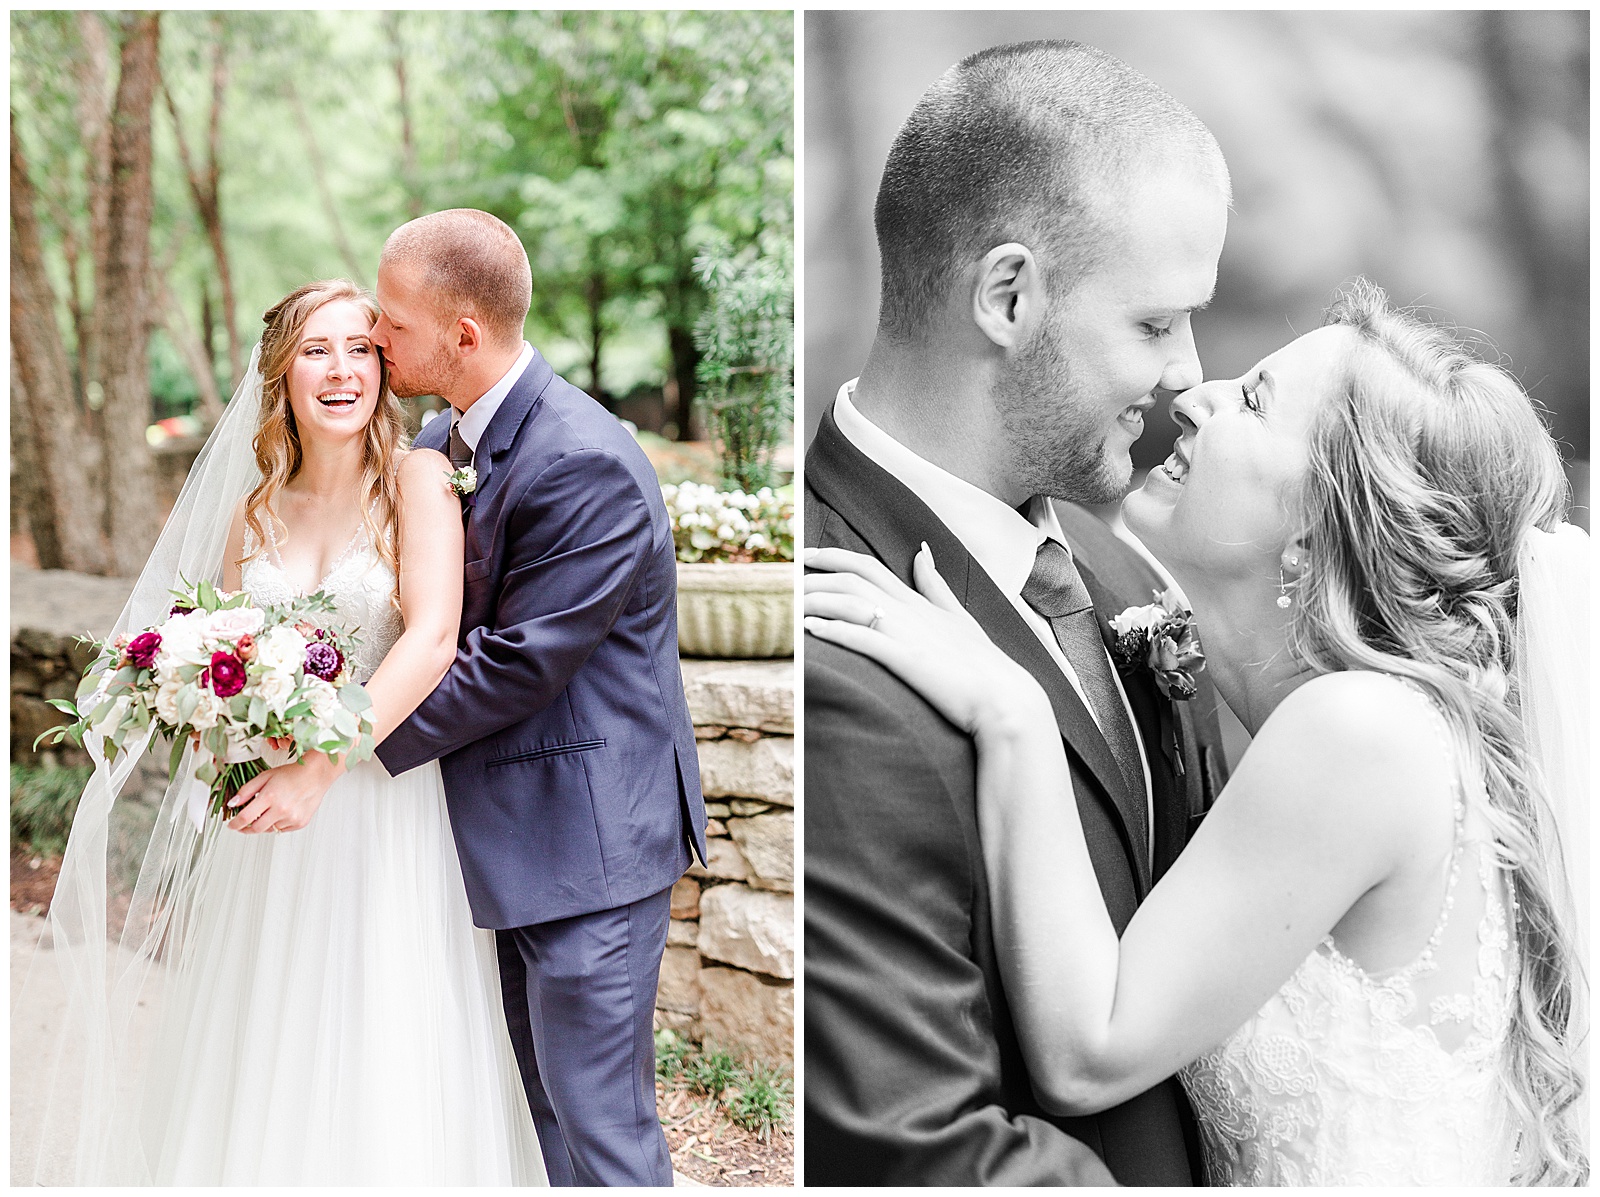 Stunning Model Photos of Gorgeous Bride in Simple V-Neck Lace wedding dress and dapper groom in gray-blue suit from Elegant Modern Summer Wedding in Charlotte, NC | check out the full wedding at KevynDixonPhoto.com